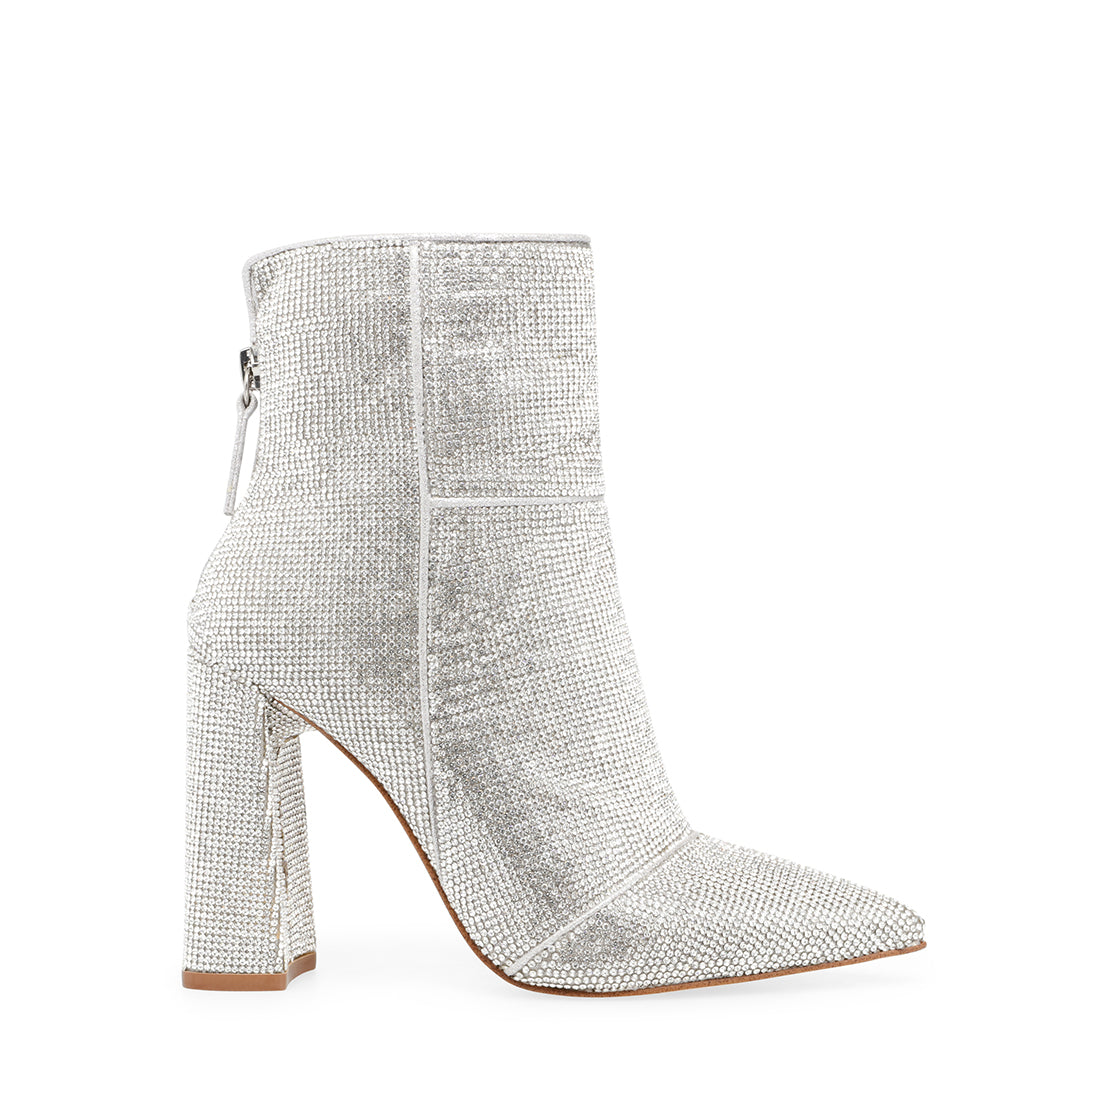 steve madden sparkly booties